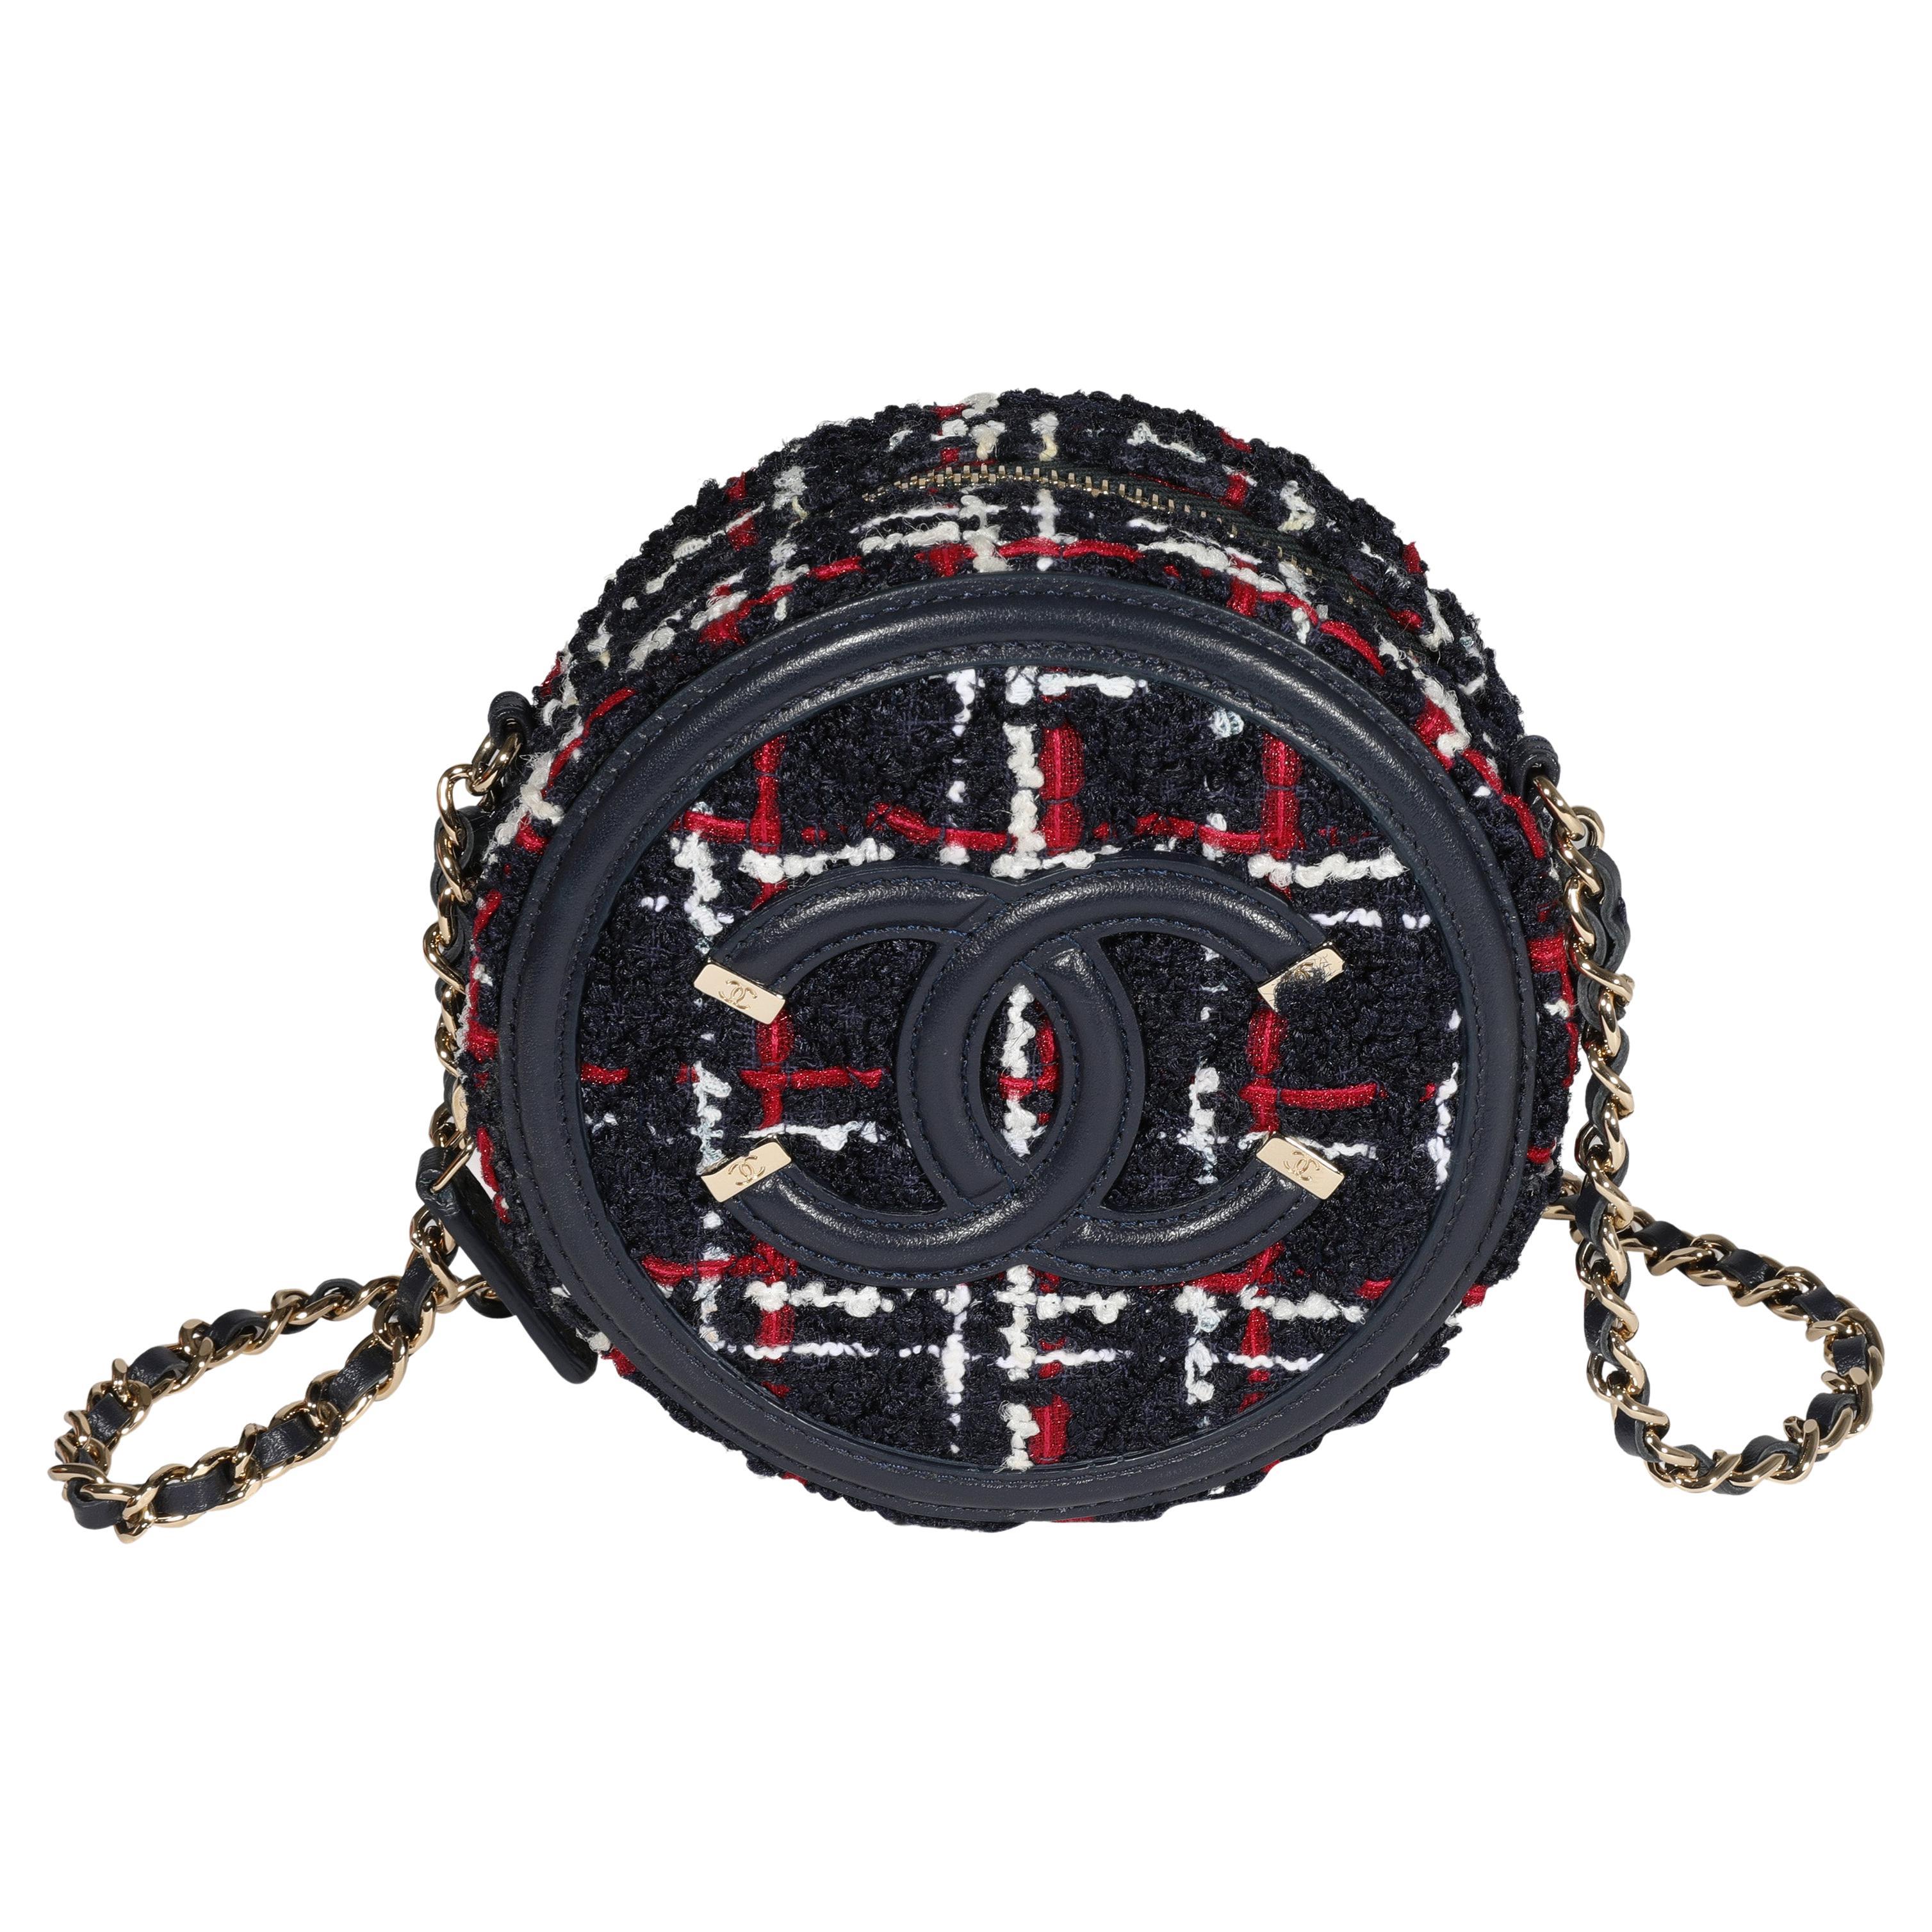 Chanel Round Crossbody Bag - 12 For Sale on 1stDibs  chanel circle  crossbody, chanel round as earth, chanel round bag